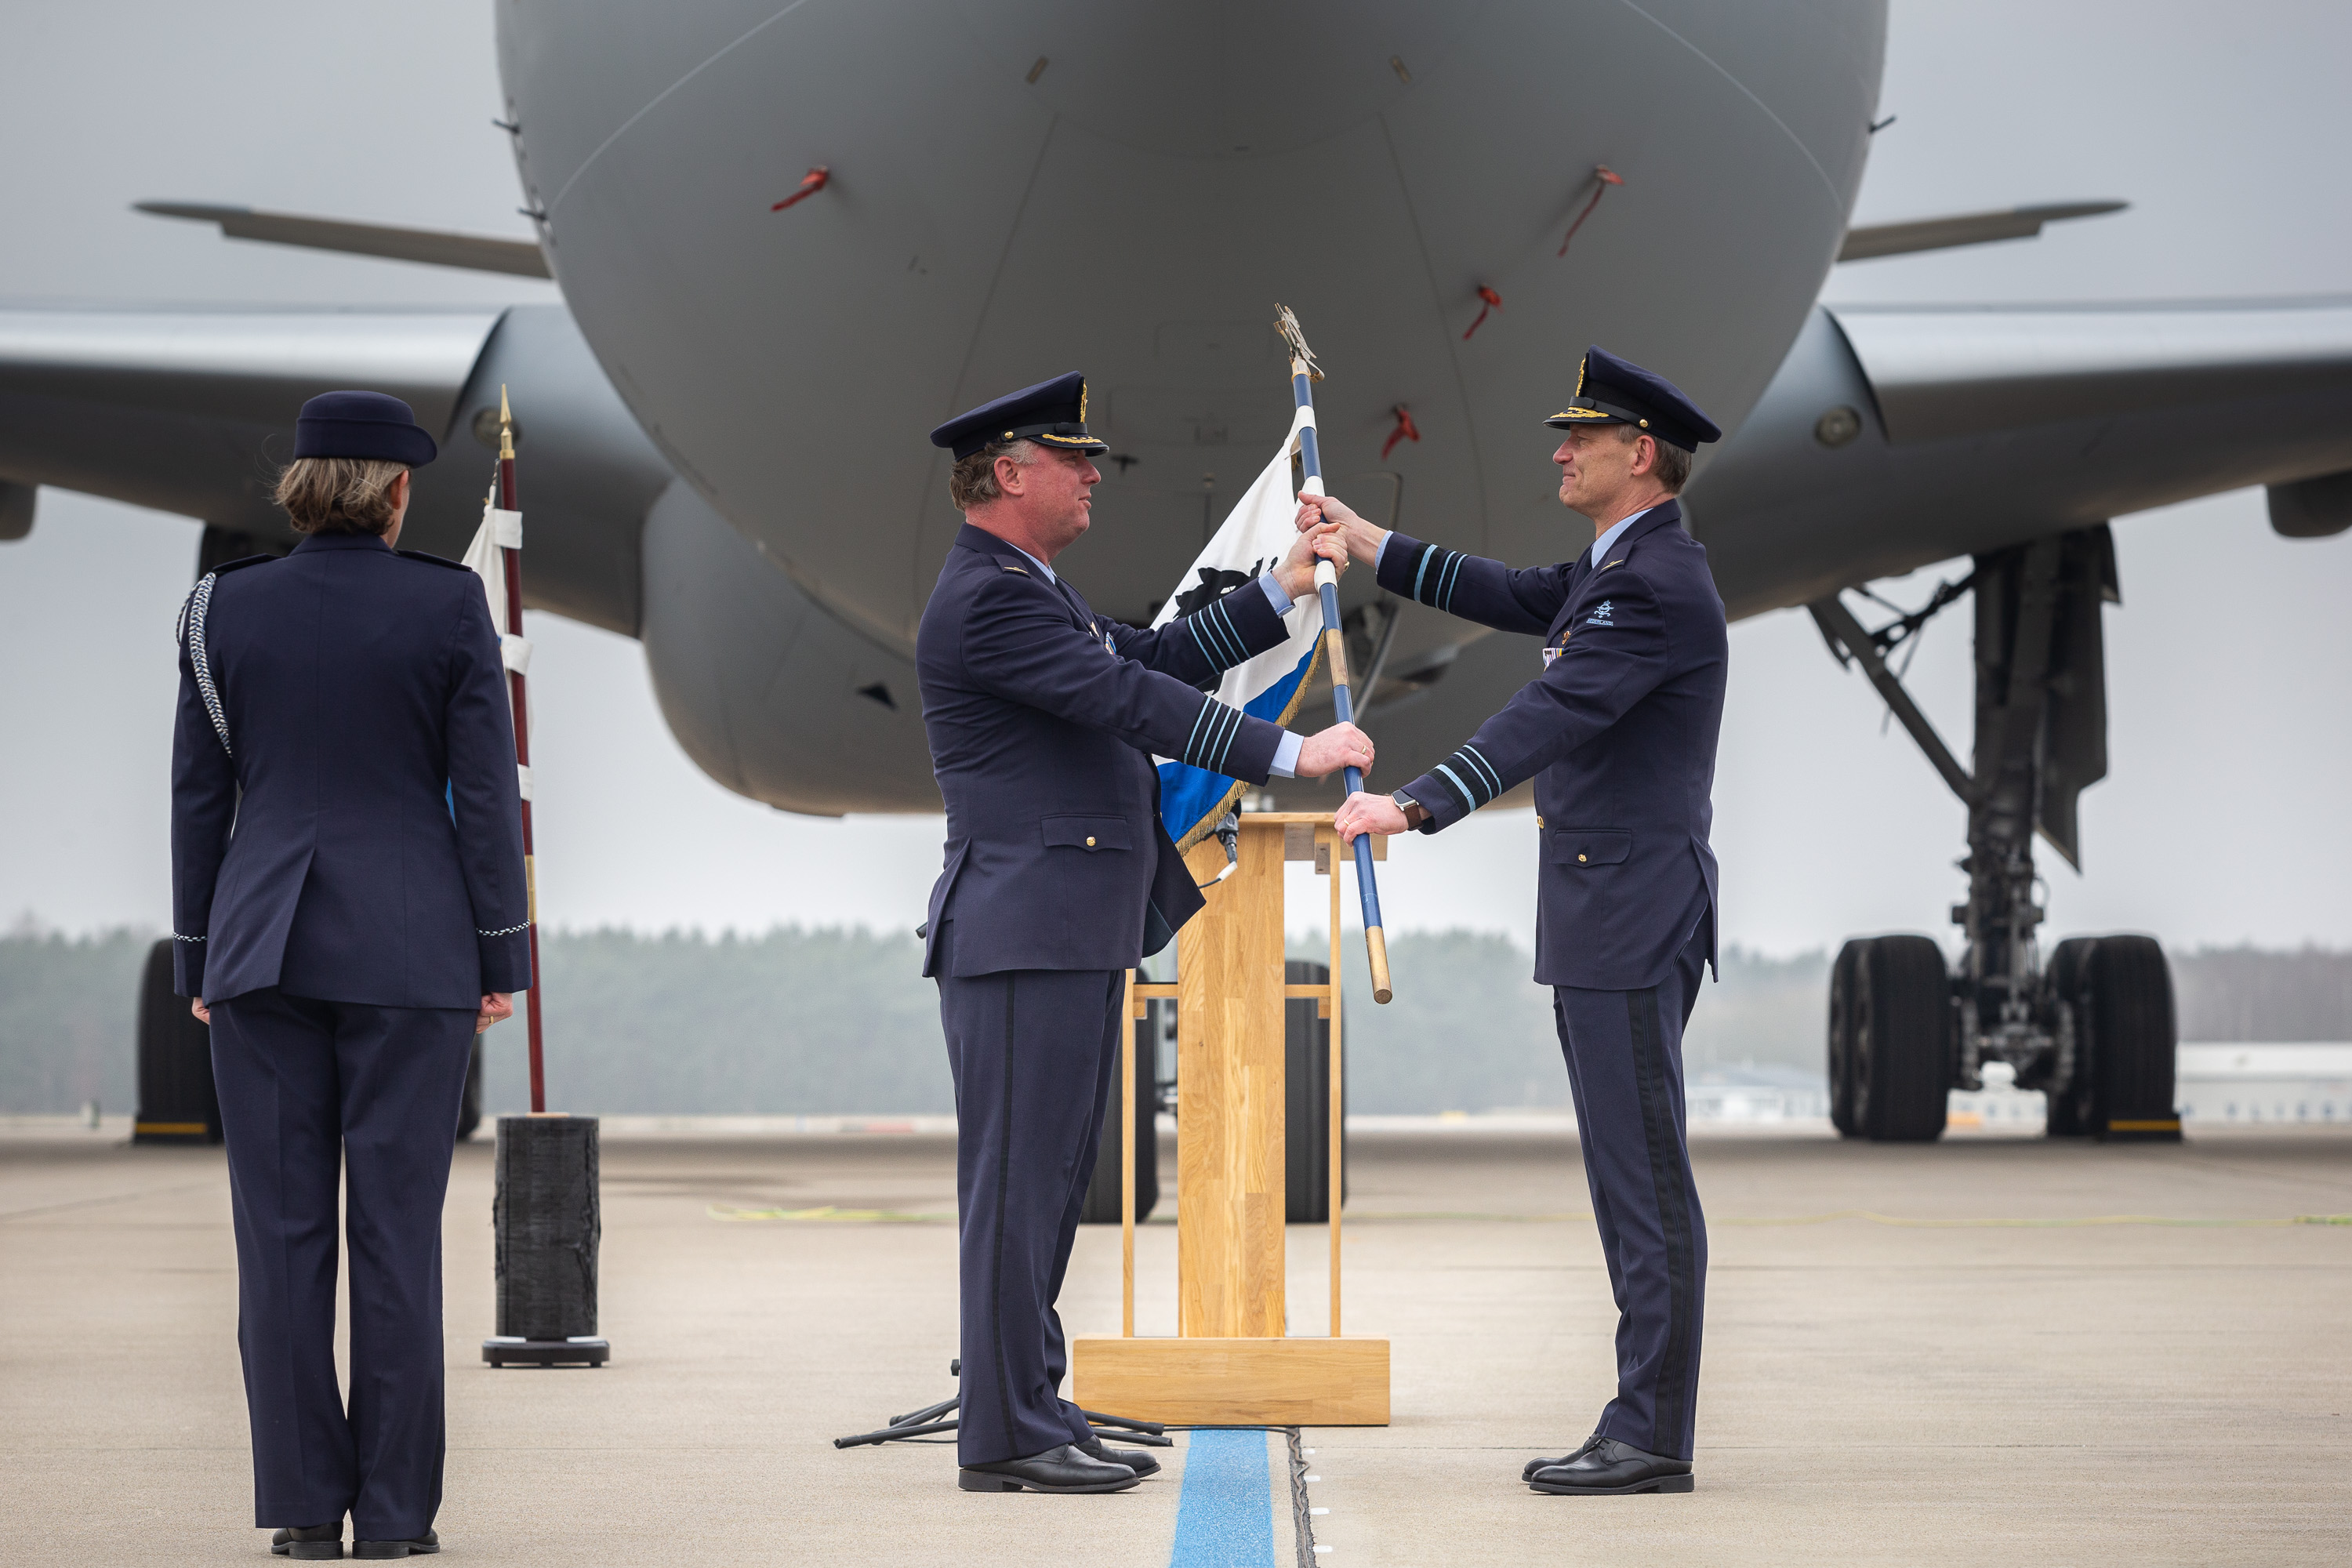 The new Air Mobility Command at Eindhoven airbase